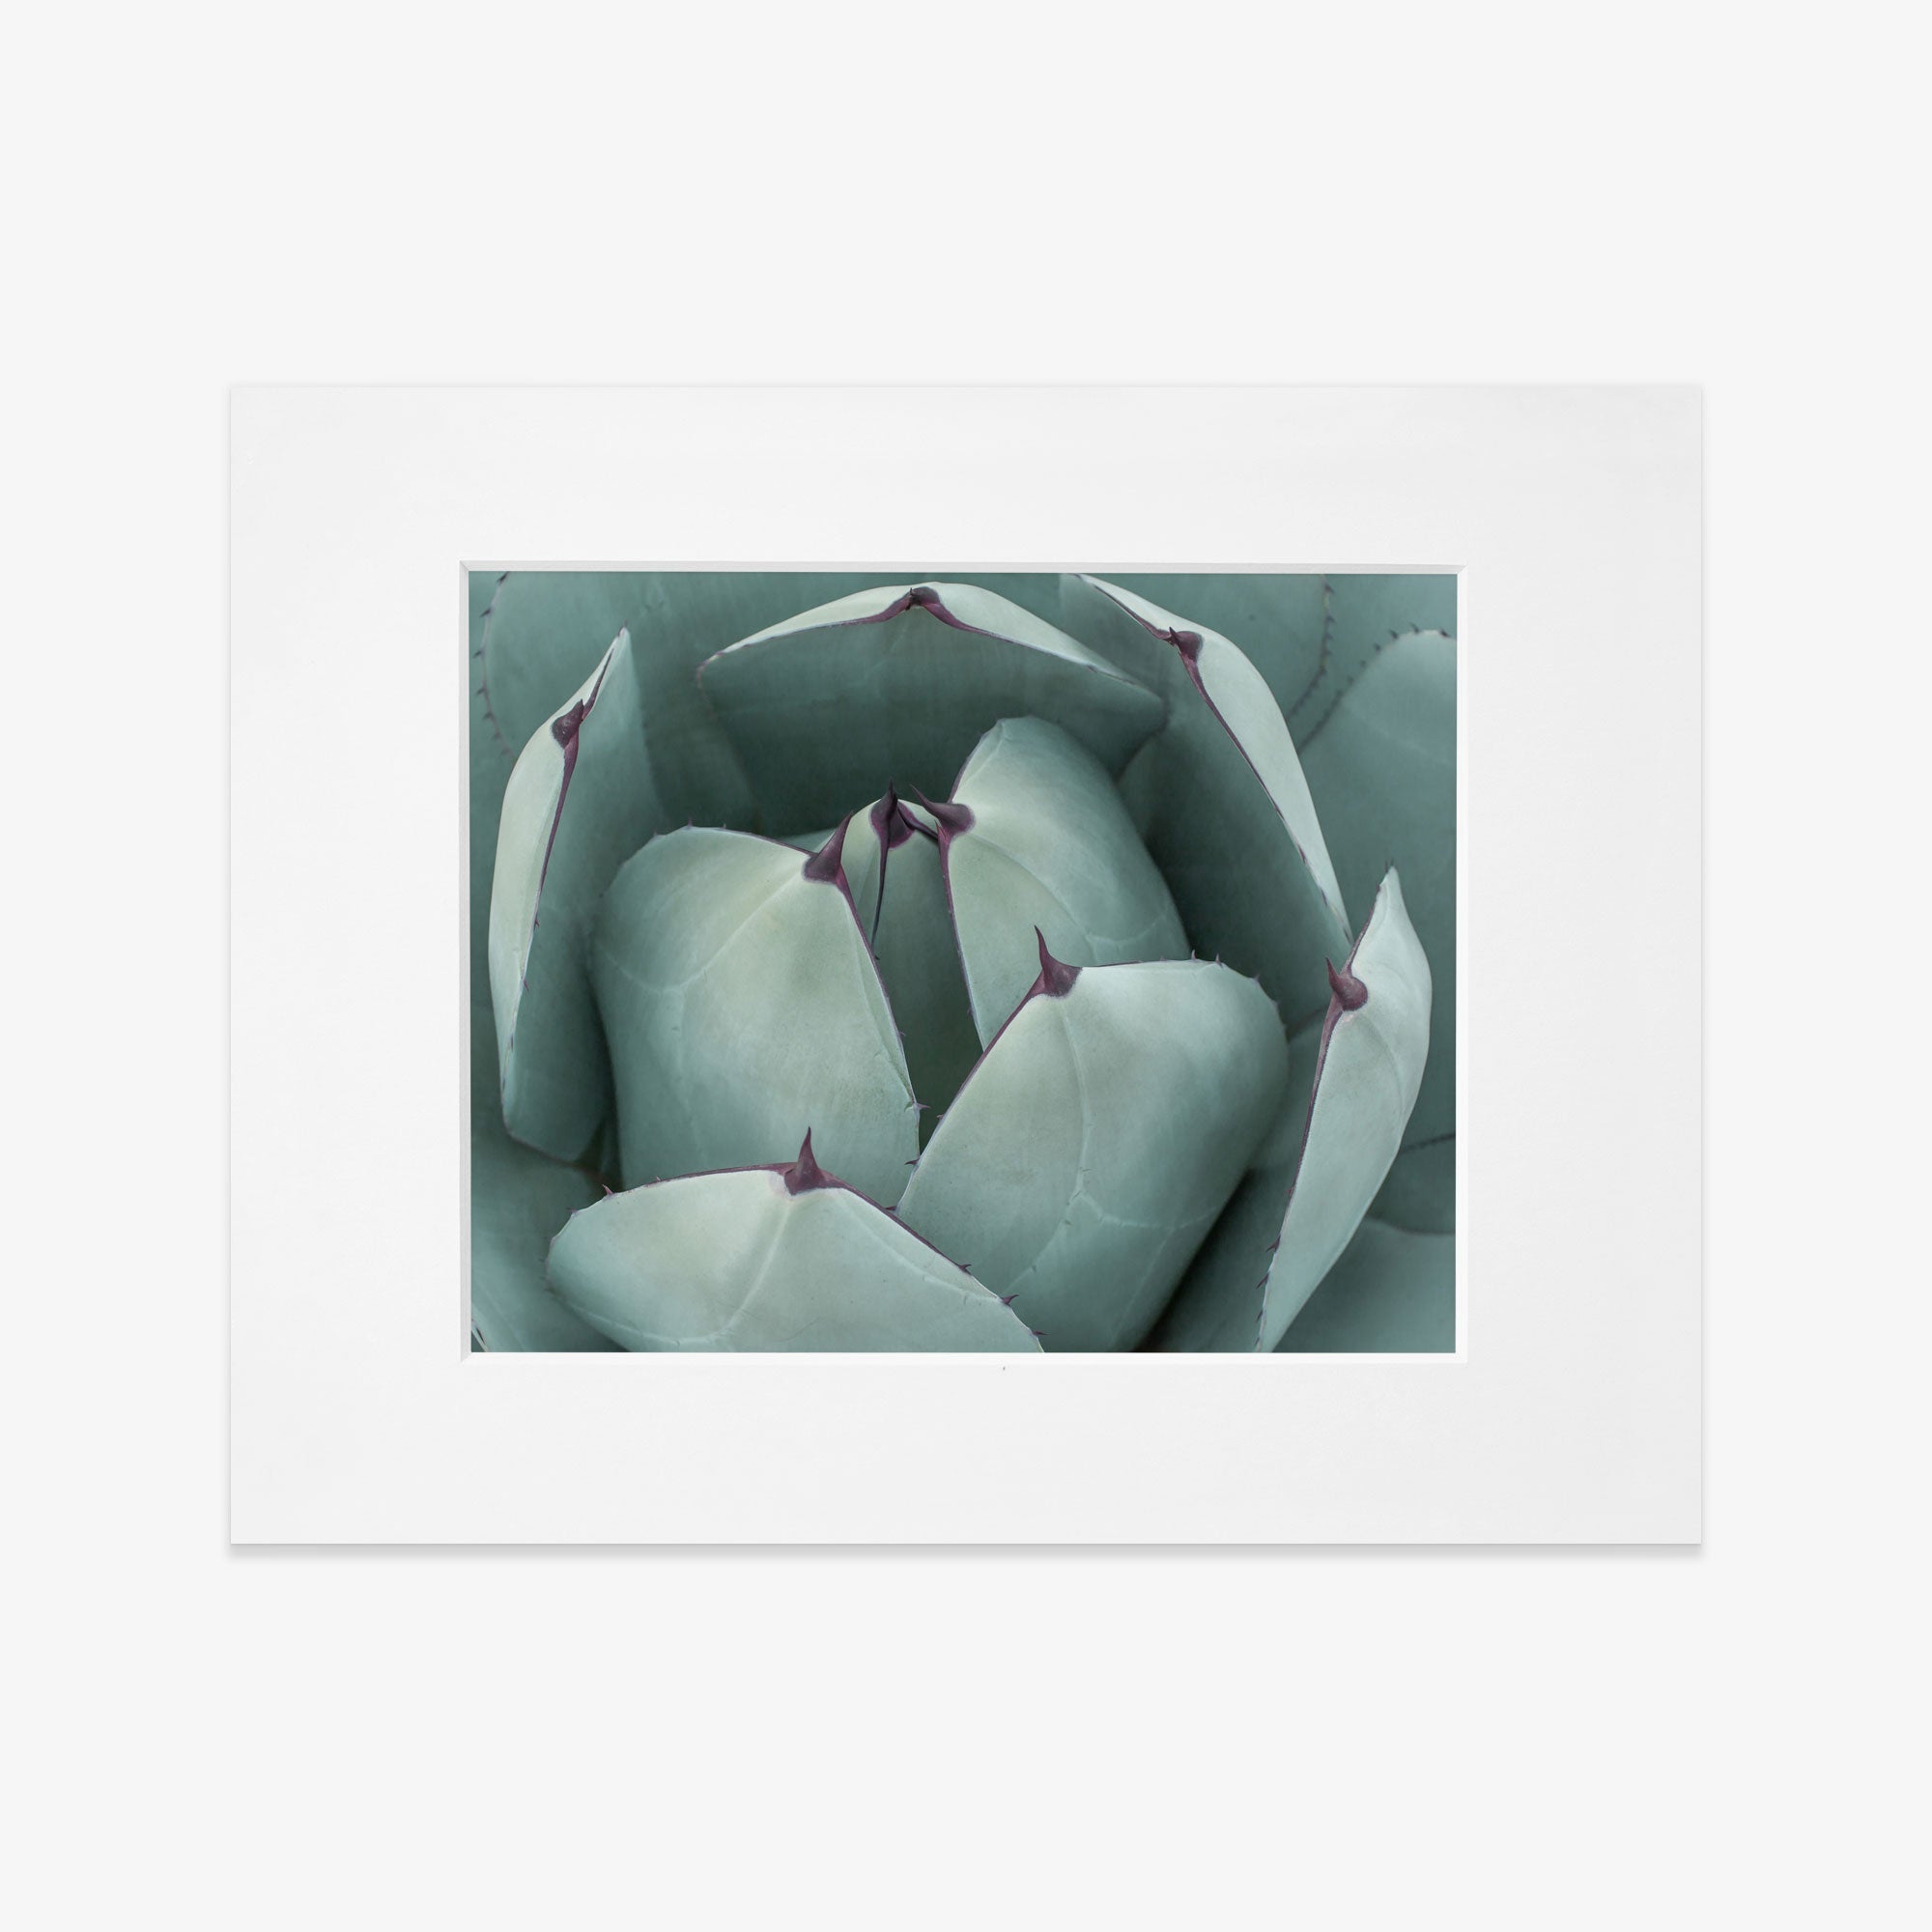 A framed photograph of a Abstract Teal Green Botanical Print, &#39;Teal Petals&#39;, printed on archival photographic paper, against a white background.